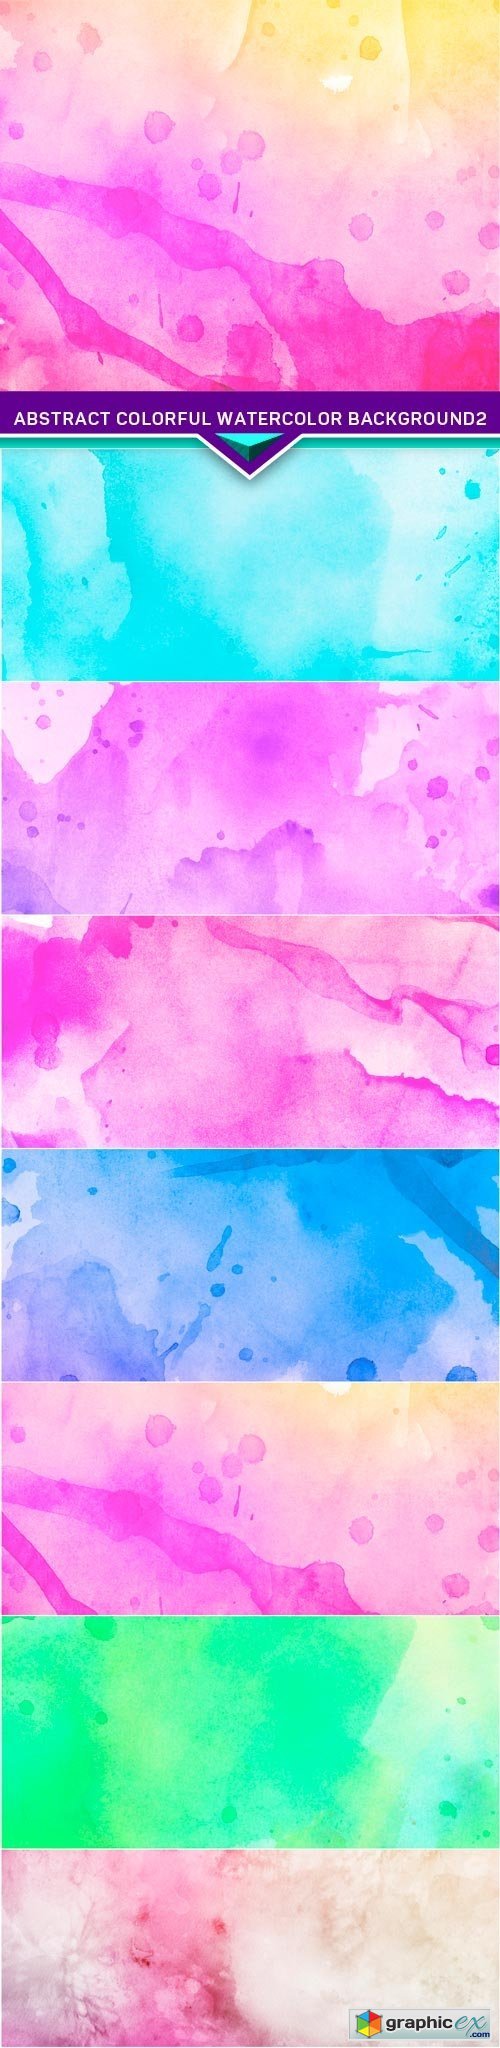 Abstract colorful watercolor background 2 7x JPEG